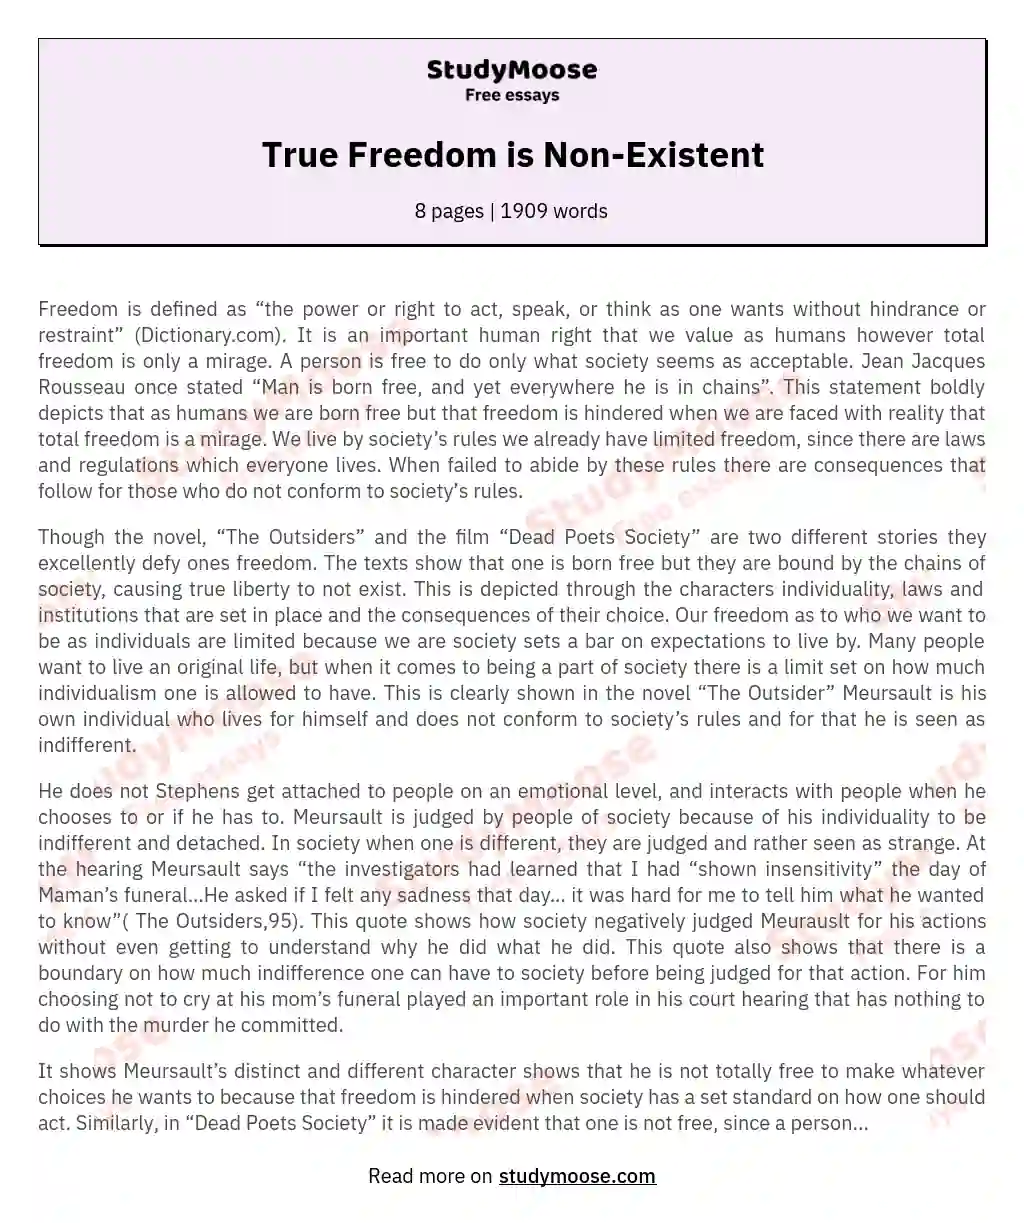 True Freedom is Non-Existent essay